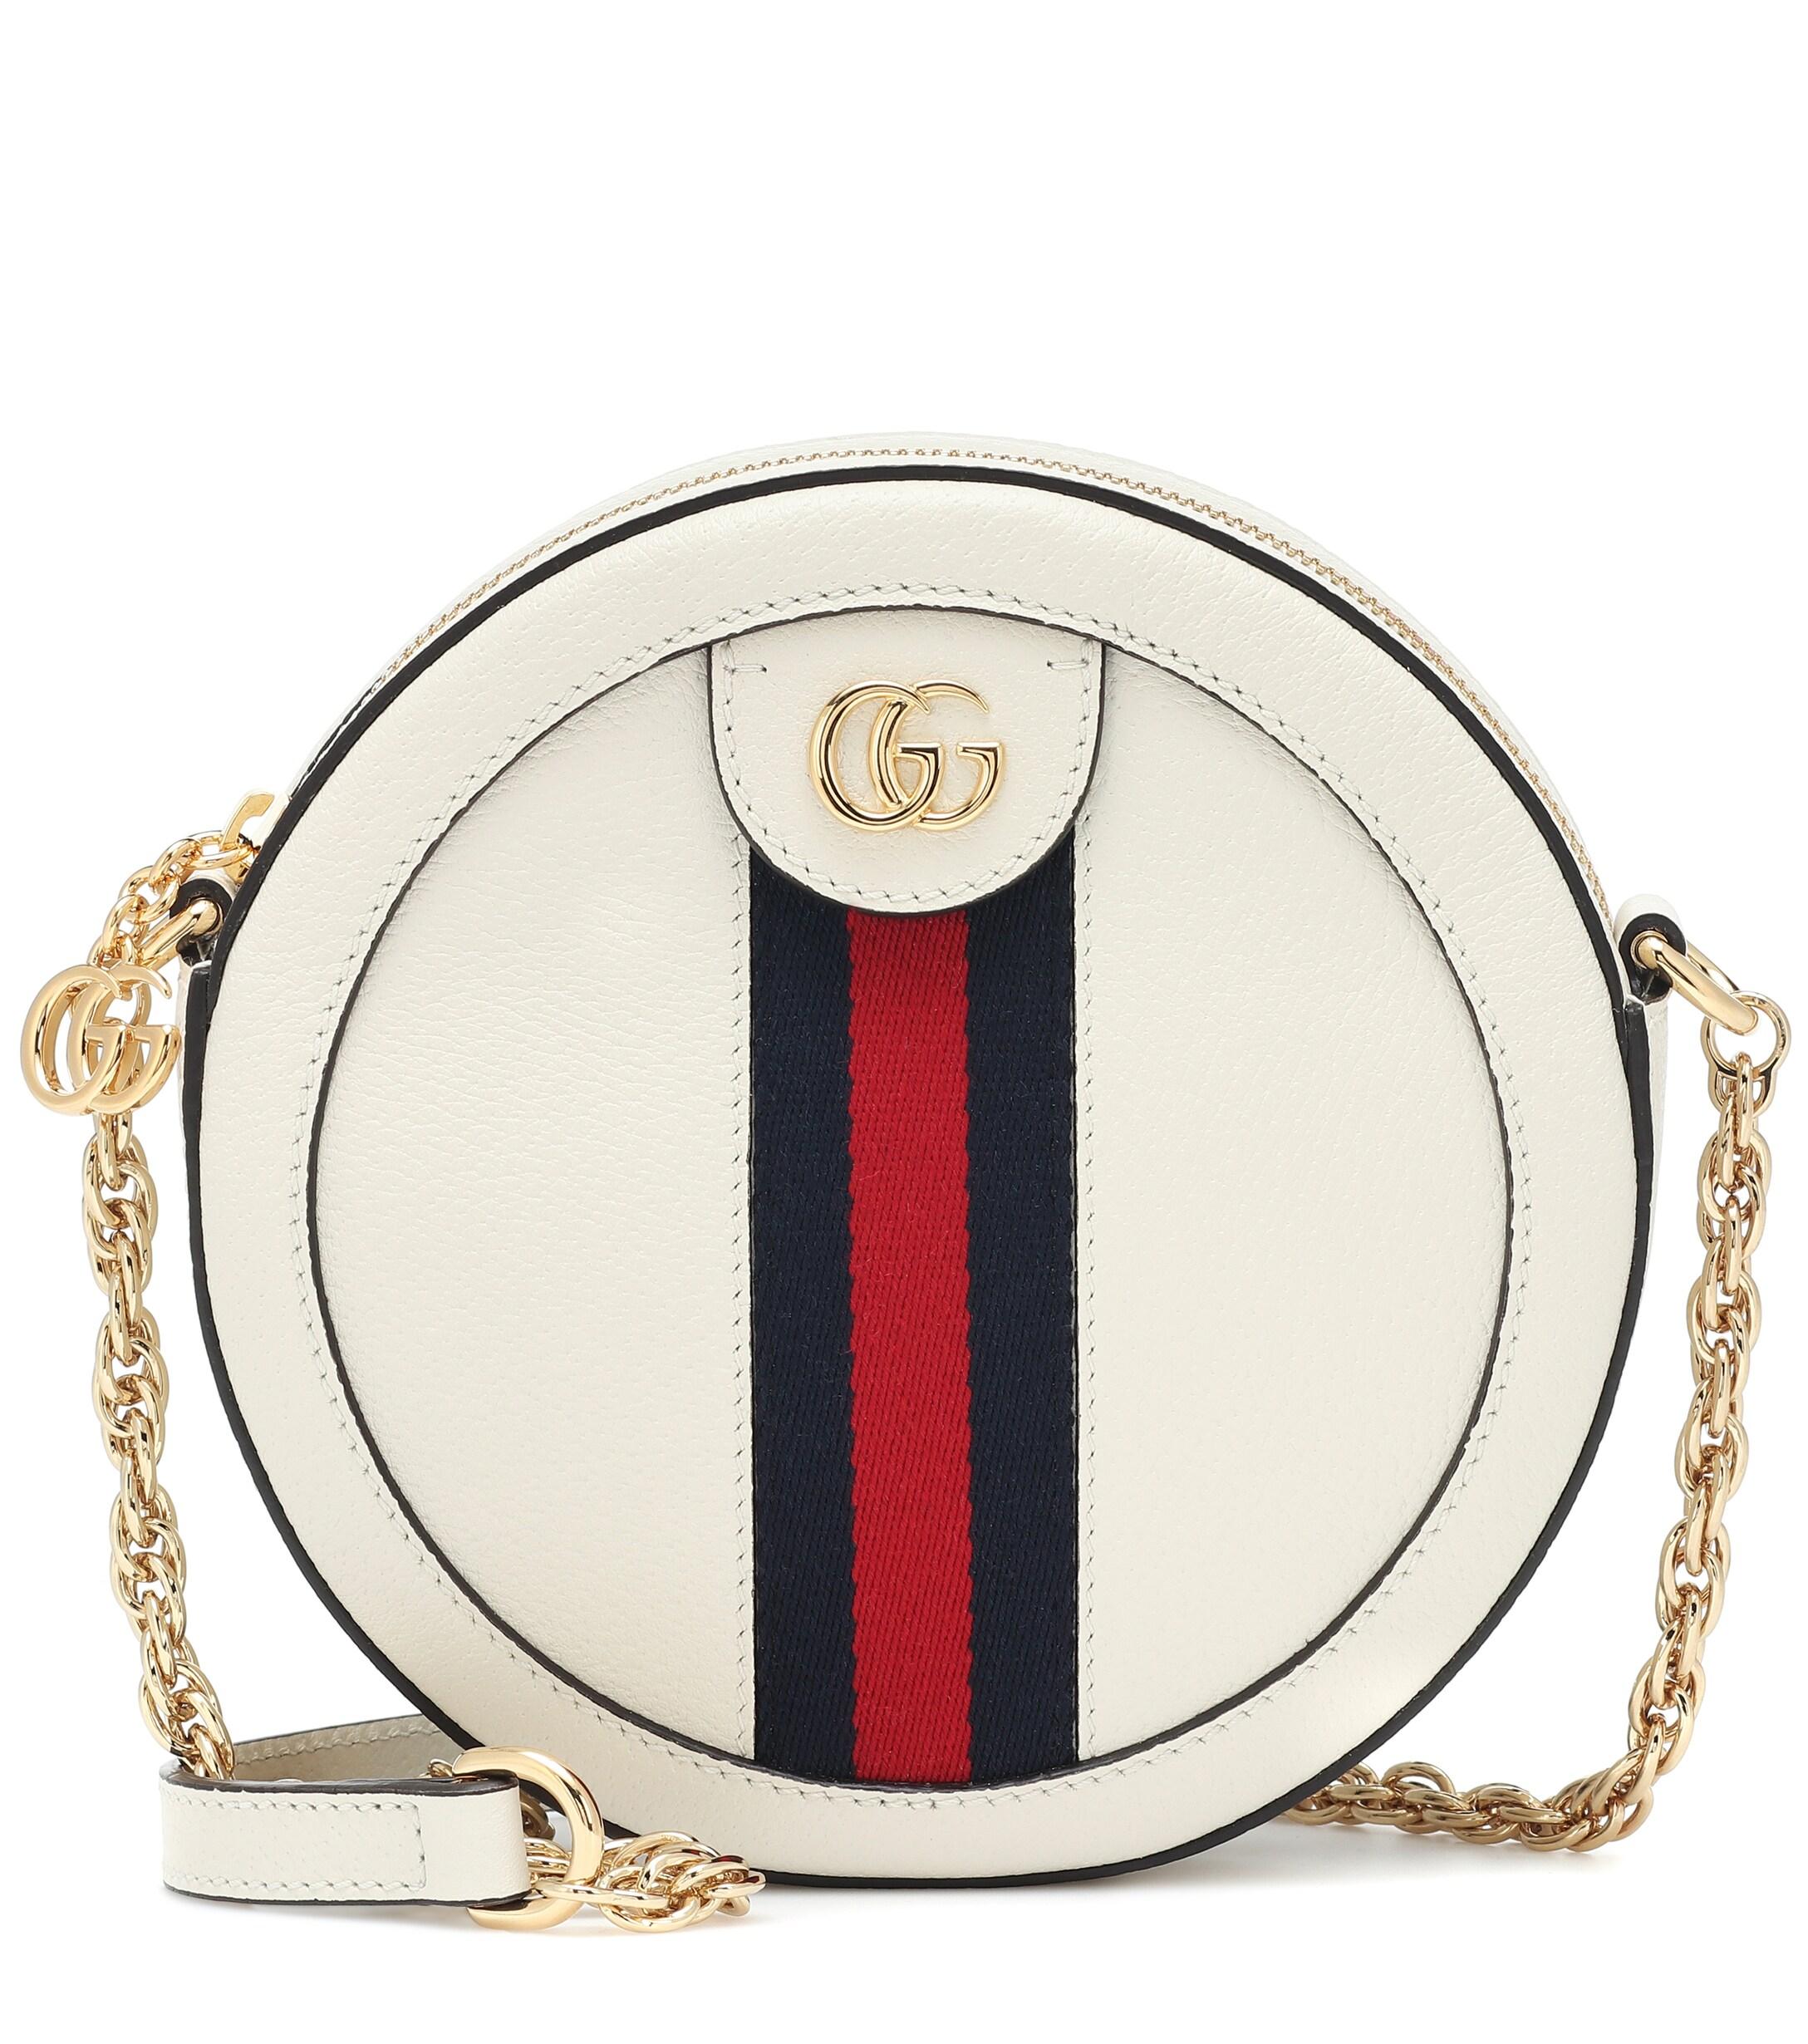 Gucci Ophidia Mini Round Leather Shoulder Bag in White - Lyst